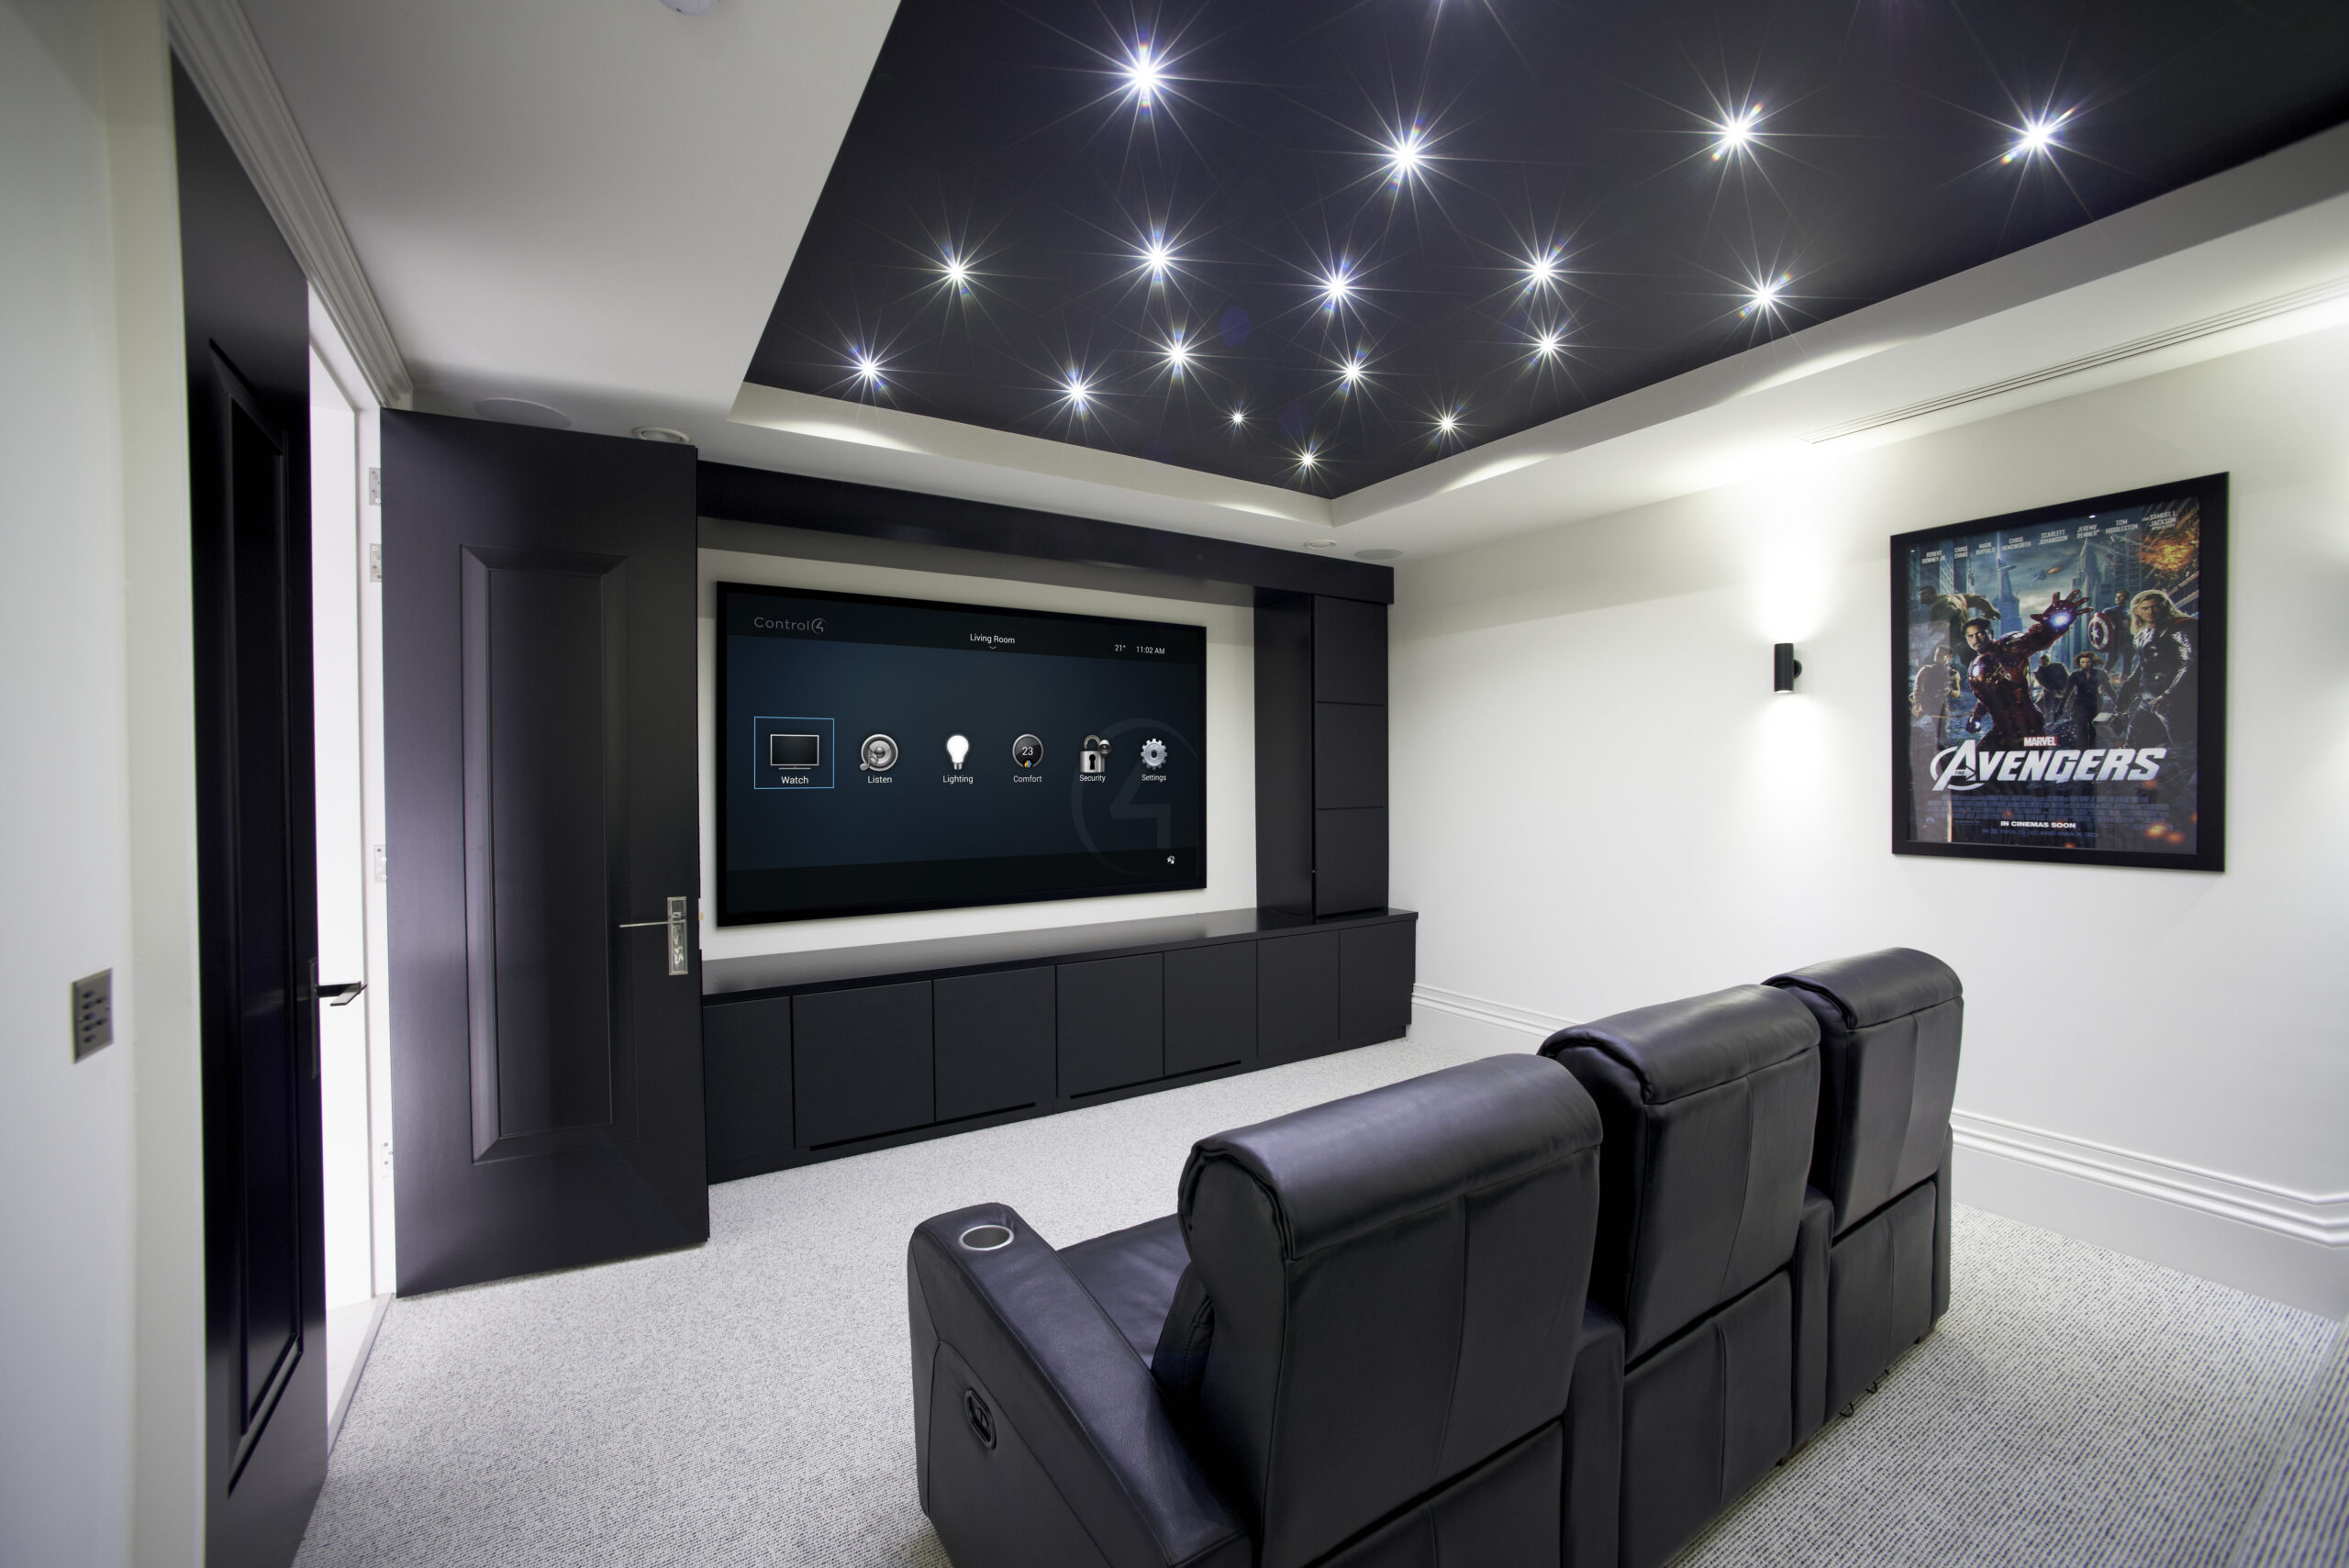 How To Install a Home Theater System; Hint: Hire a Professional